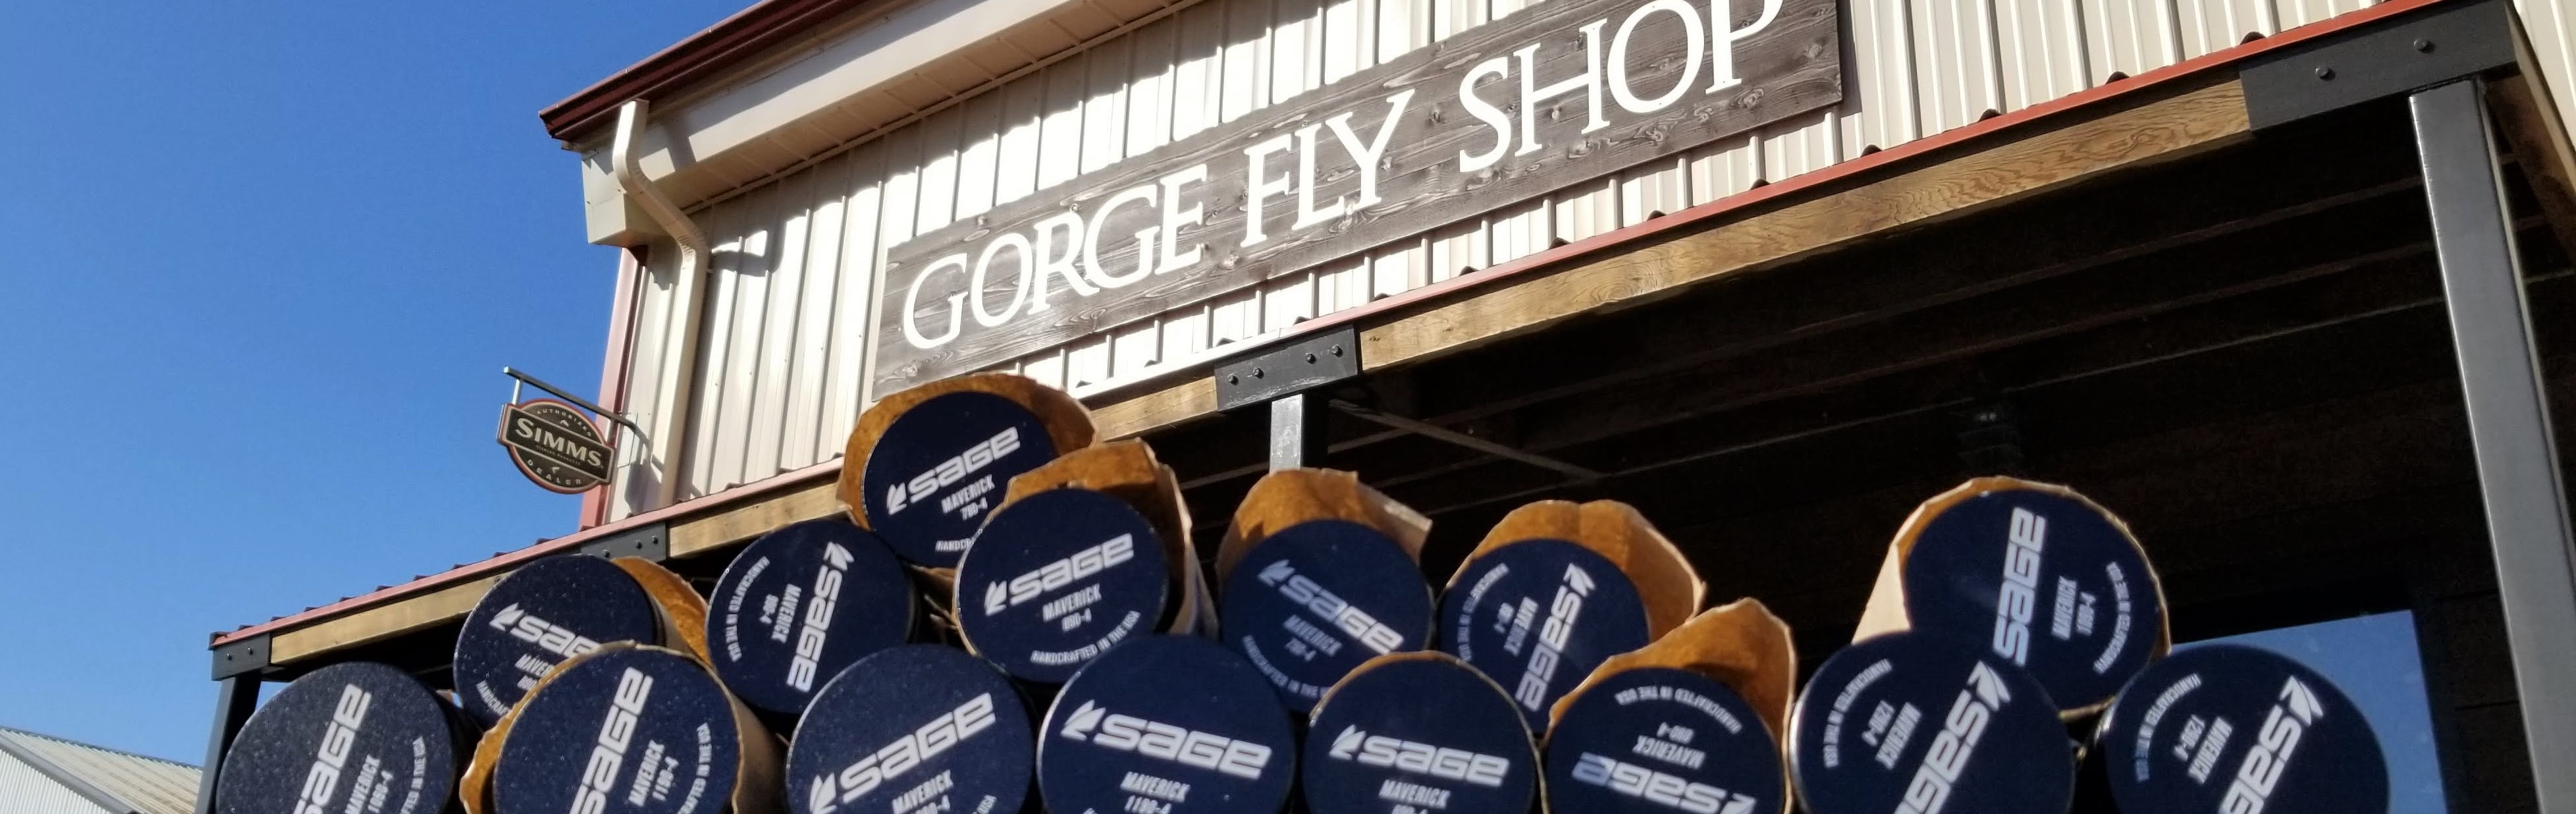 Gorge Fly Shop New Arrivals